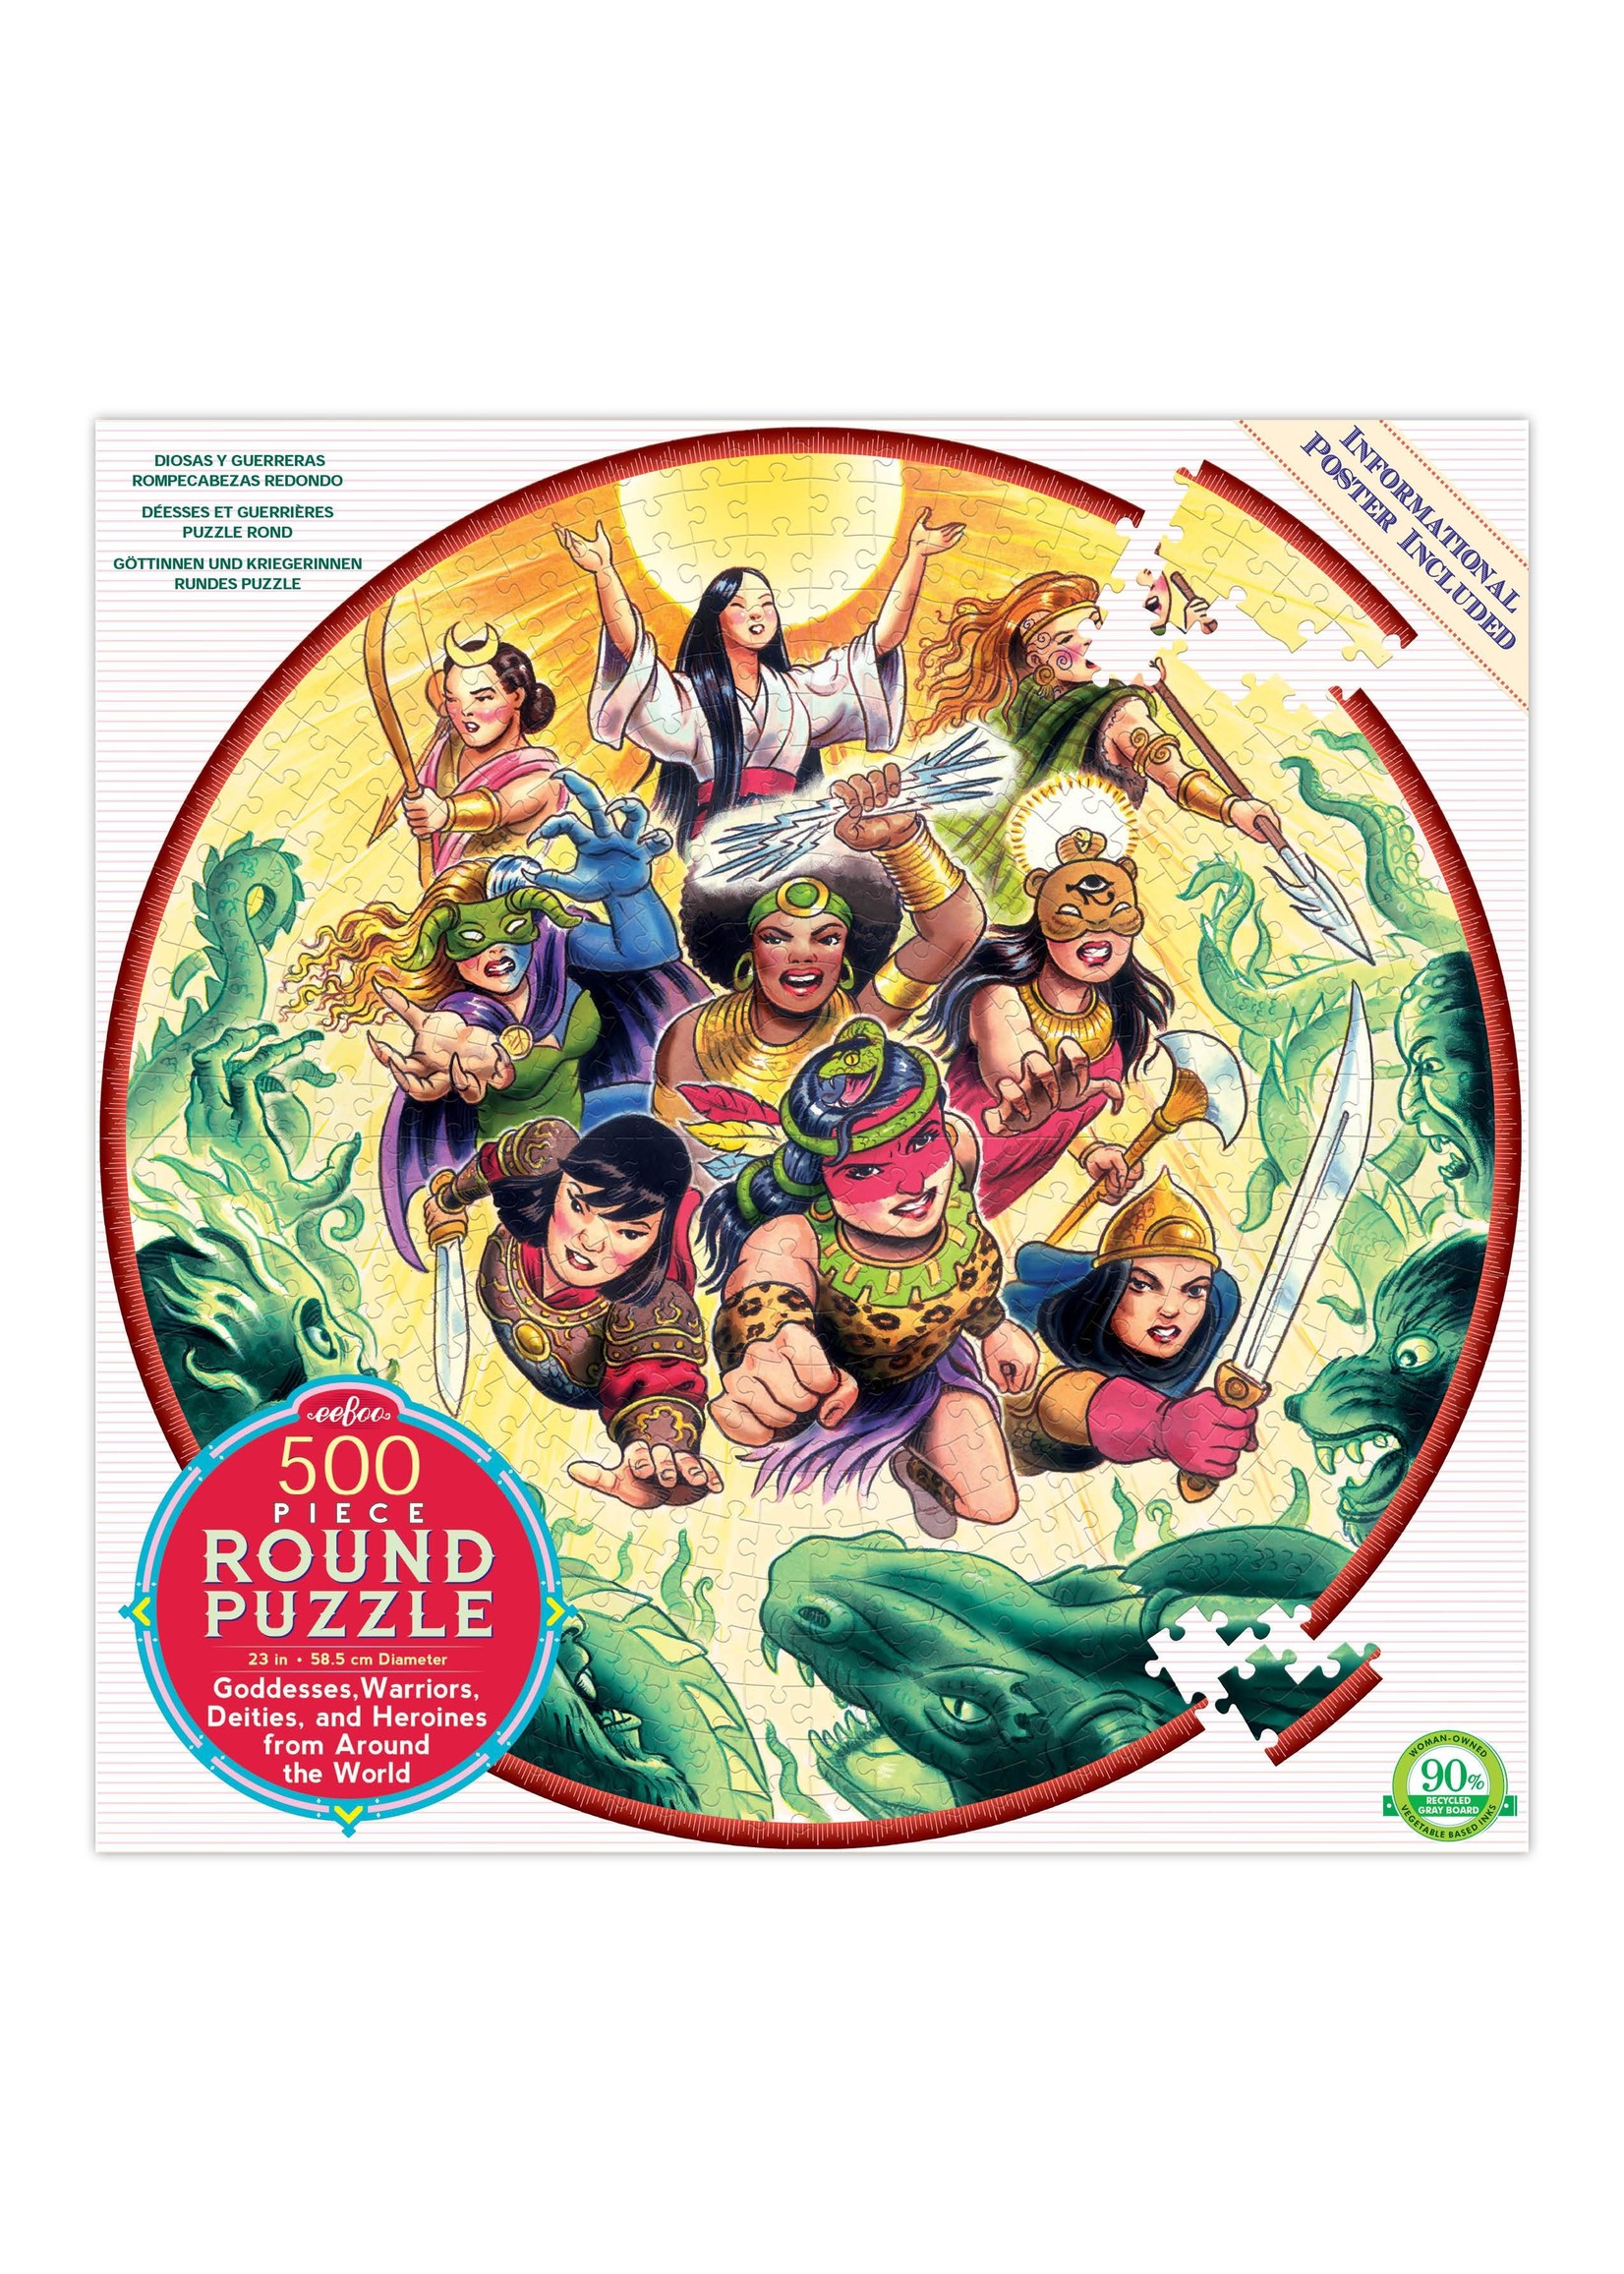 eeBoo "Goddesses and Warriors" 500 Piece Round Puzzle